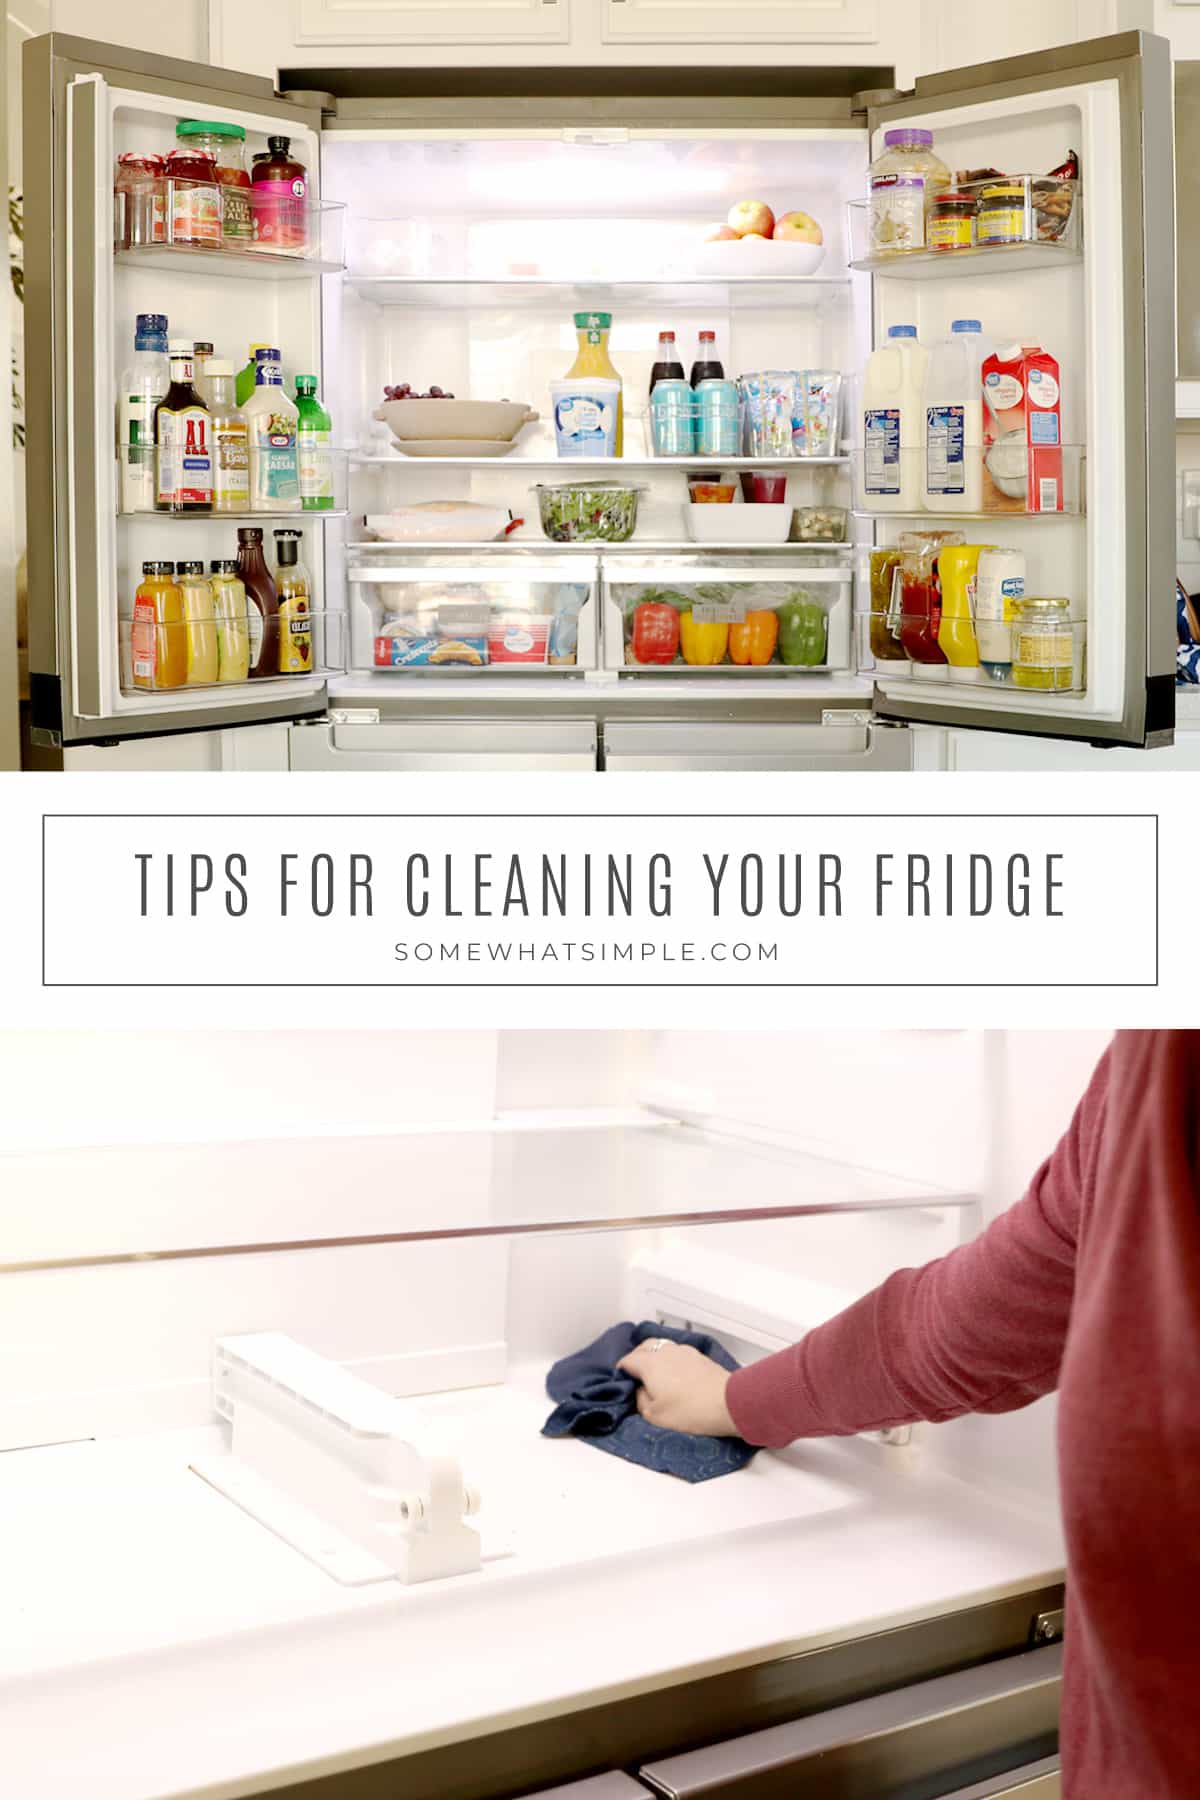 10 Steps to a Clean Walk-In Cooler or Freezer - Big Plate